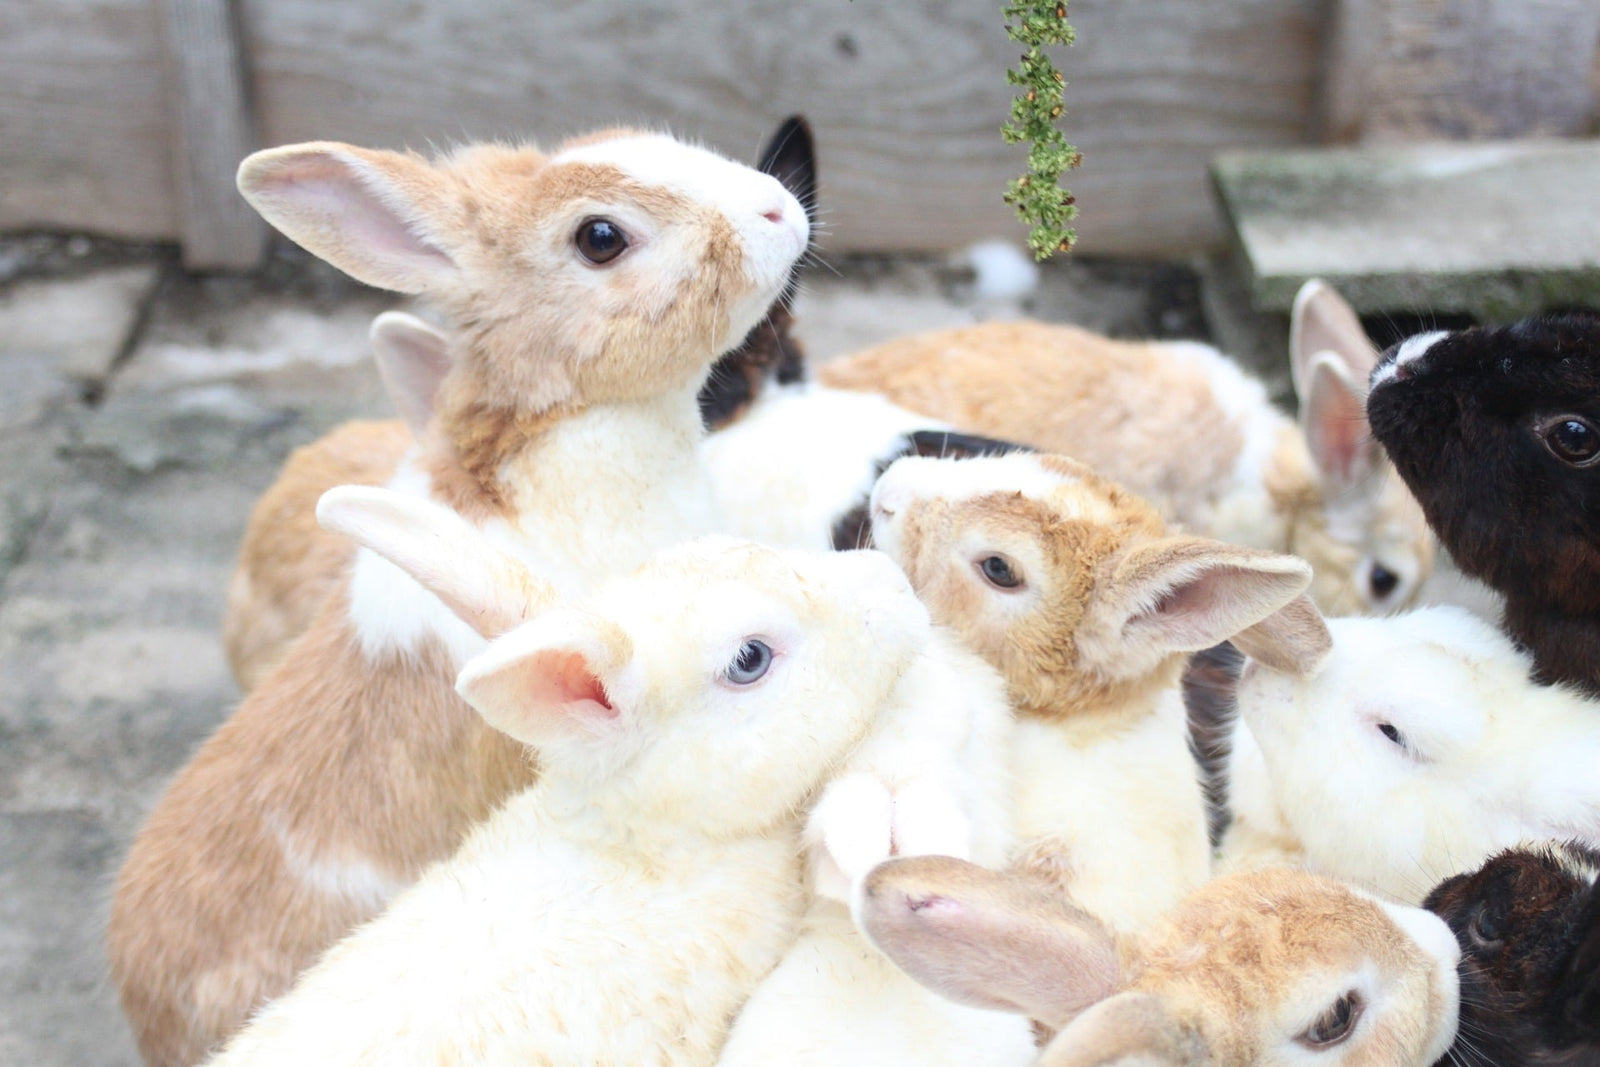 Should I Neuter My Rabbit? Making The Right Choice For Your Bunny